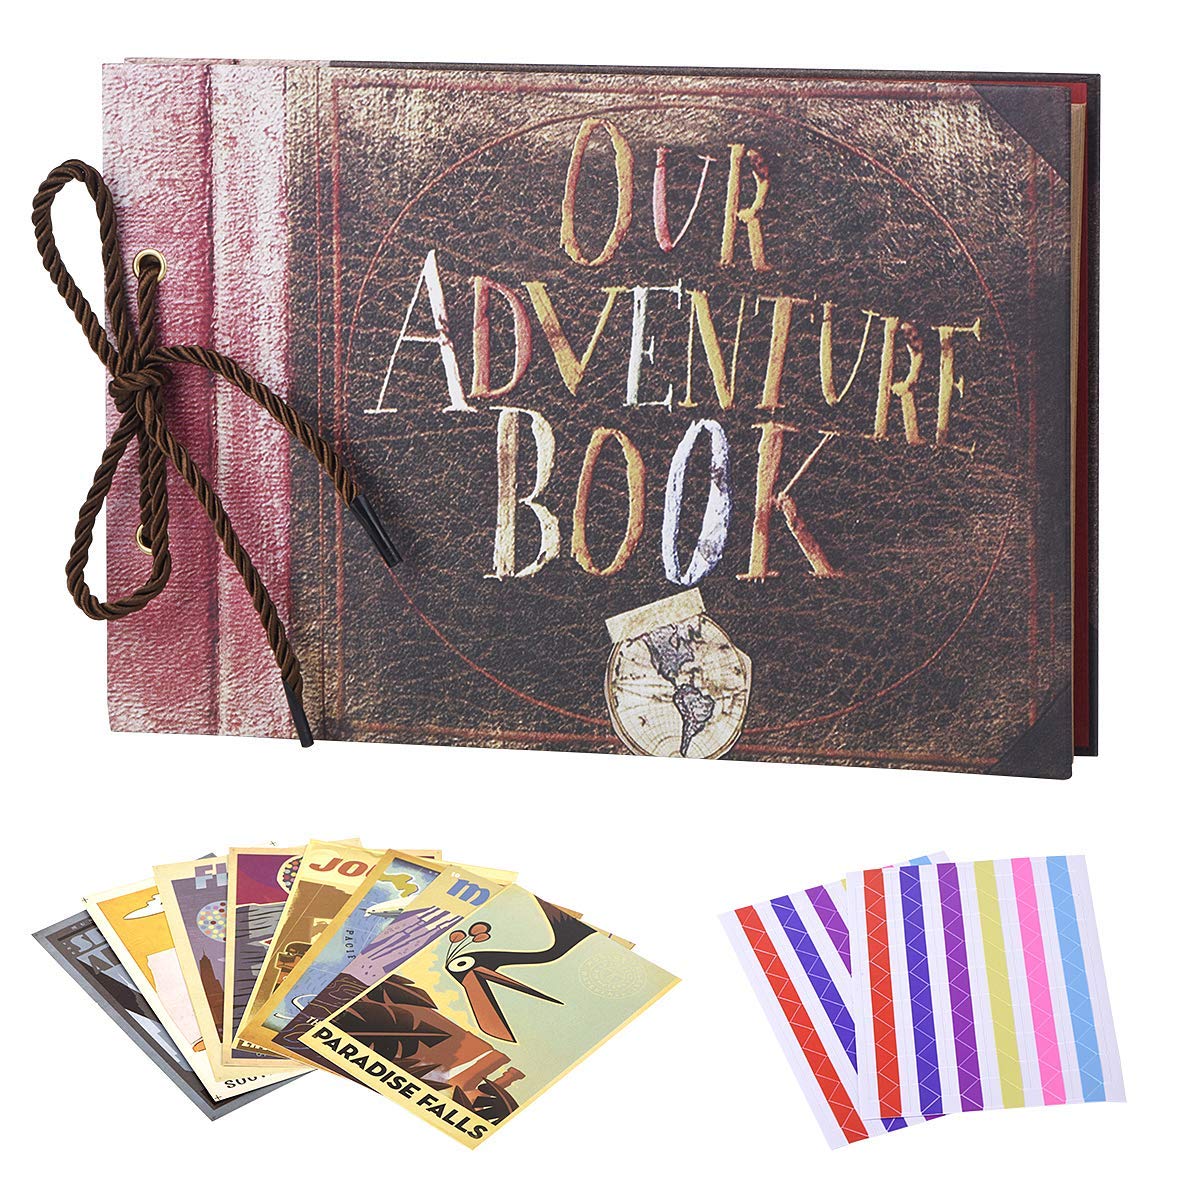 2021 Yearbook - Our Adventure Book